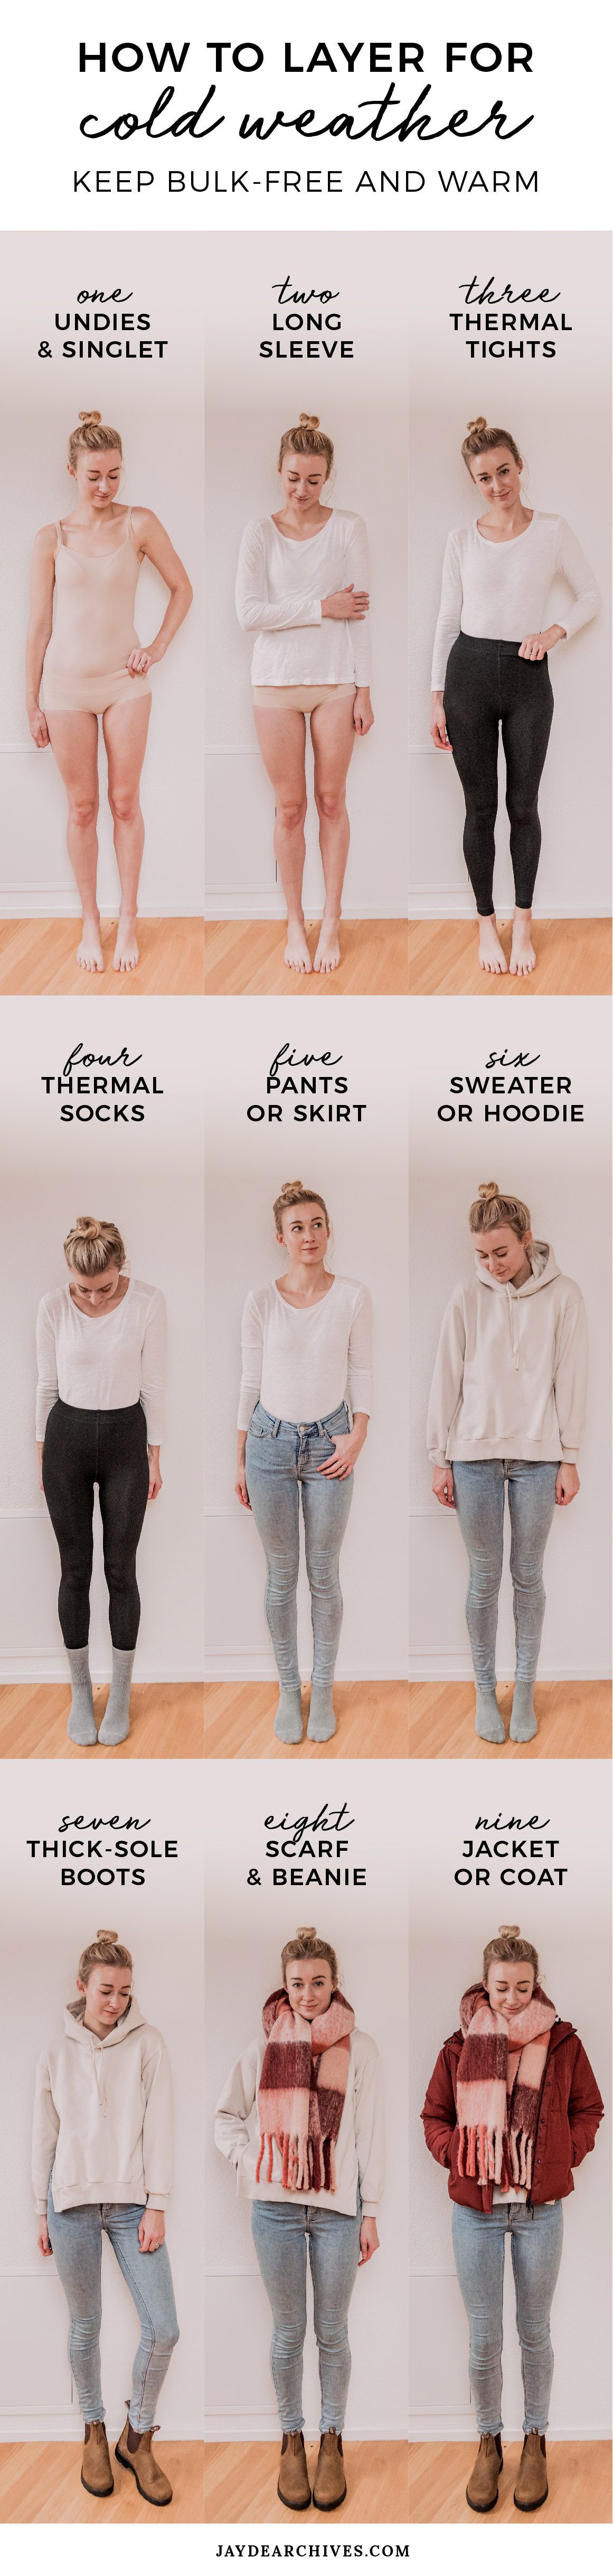 How to Layer Clothes for Cold Weather: Bulk-Free and Warm - Jayde Archives  Photography